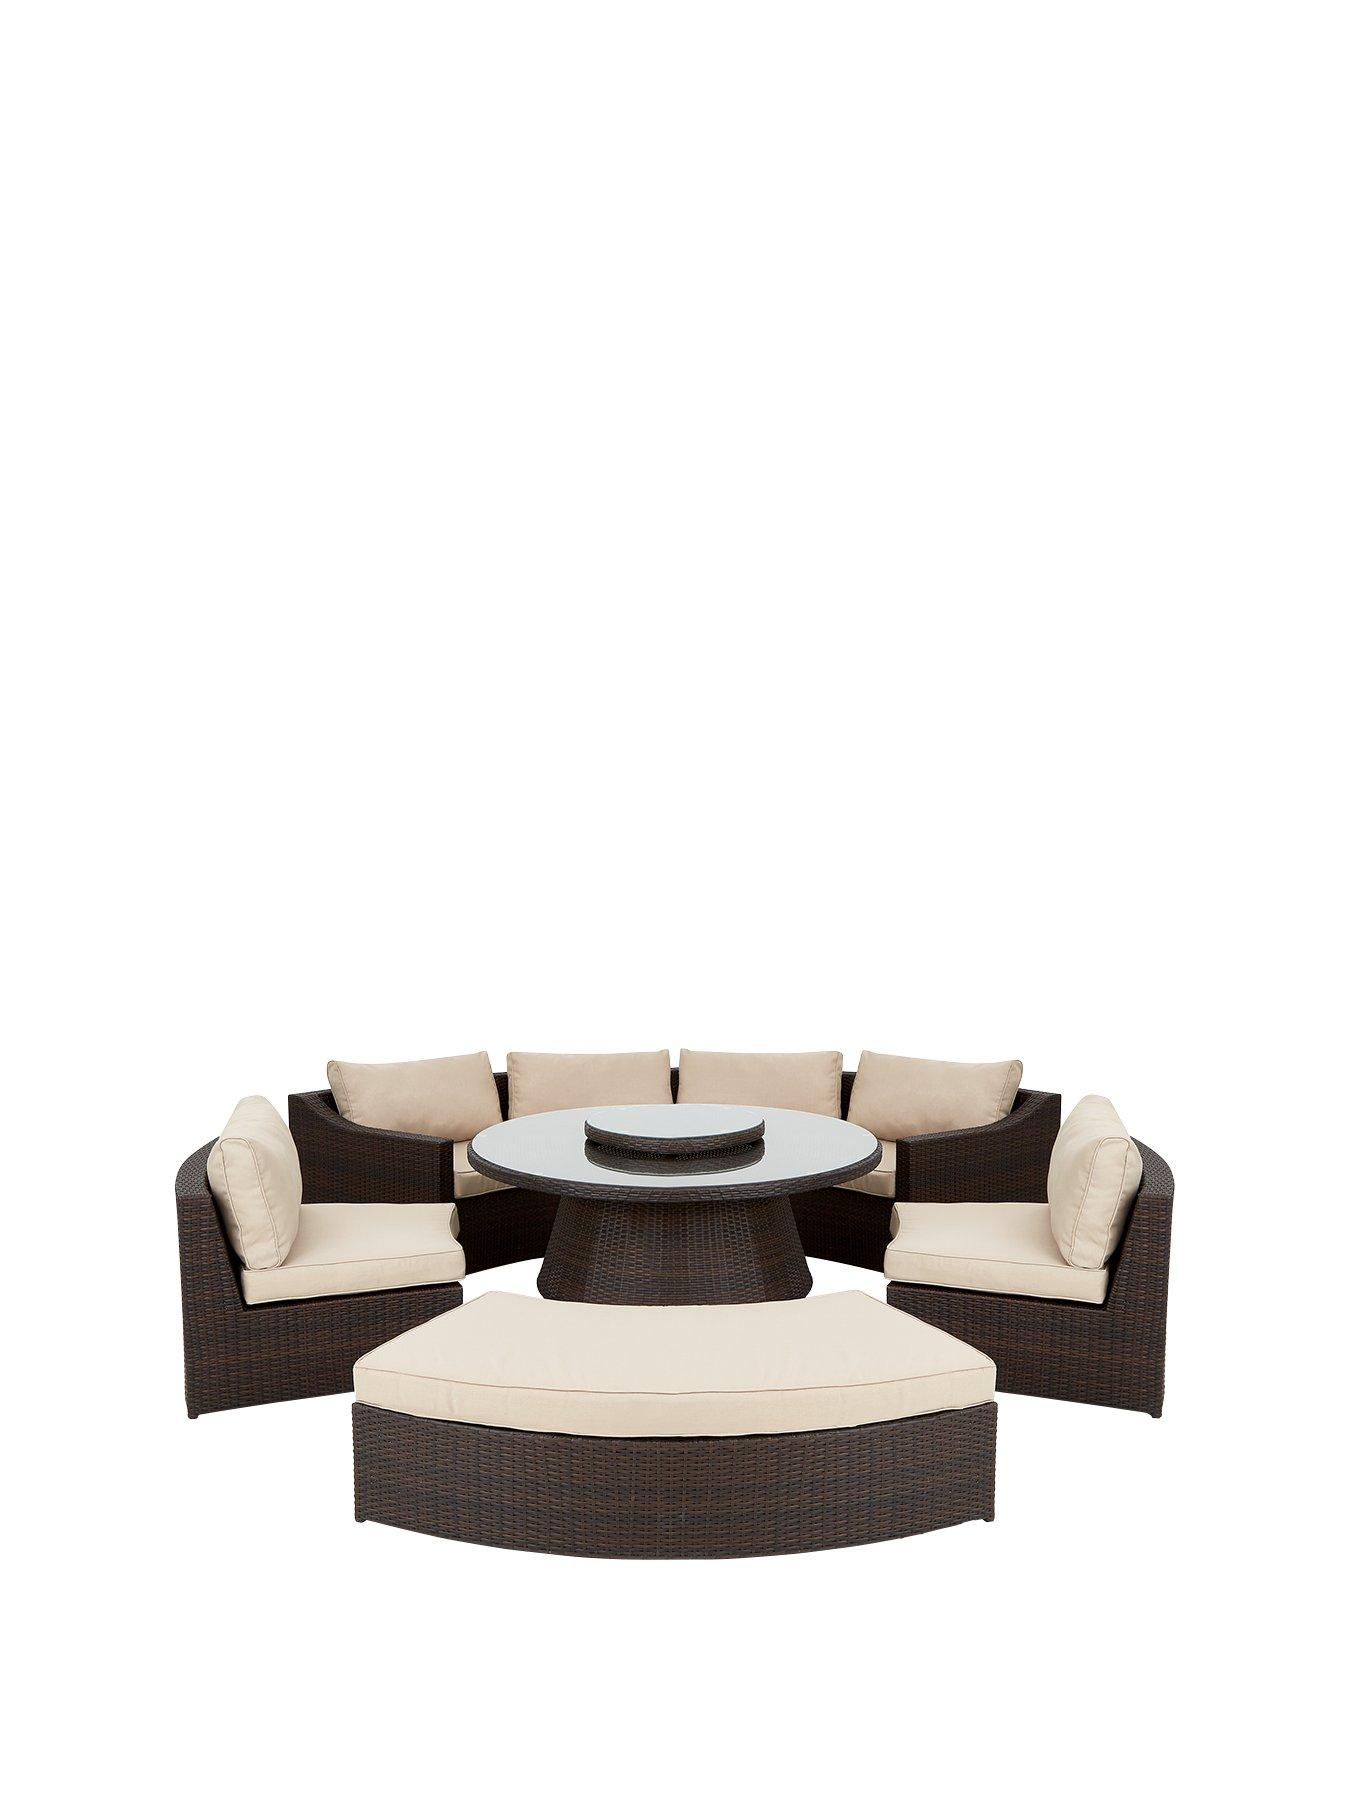 San Remo 6 Piece Dining Set With Round Table | very.co.uk